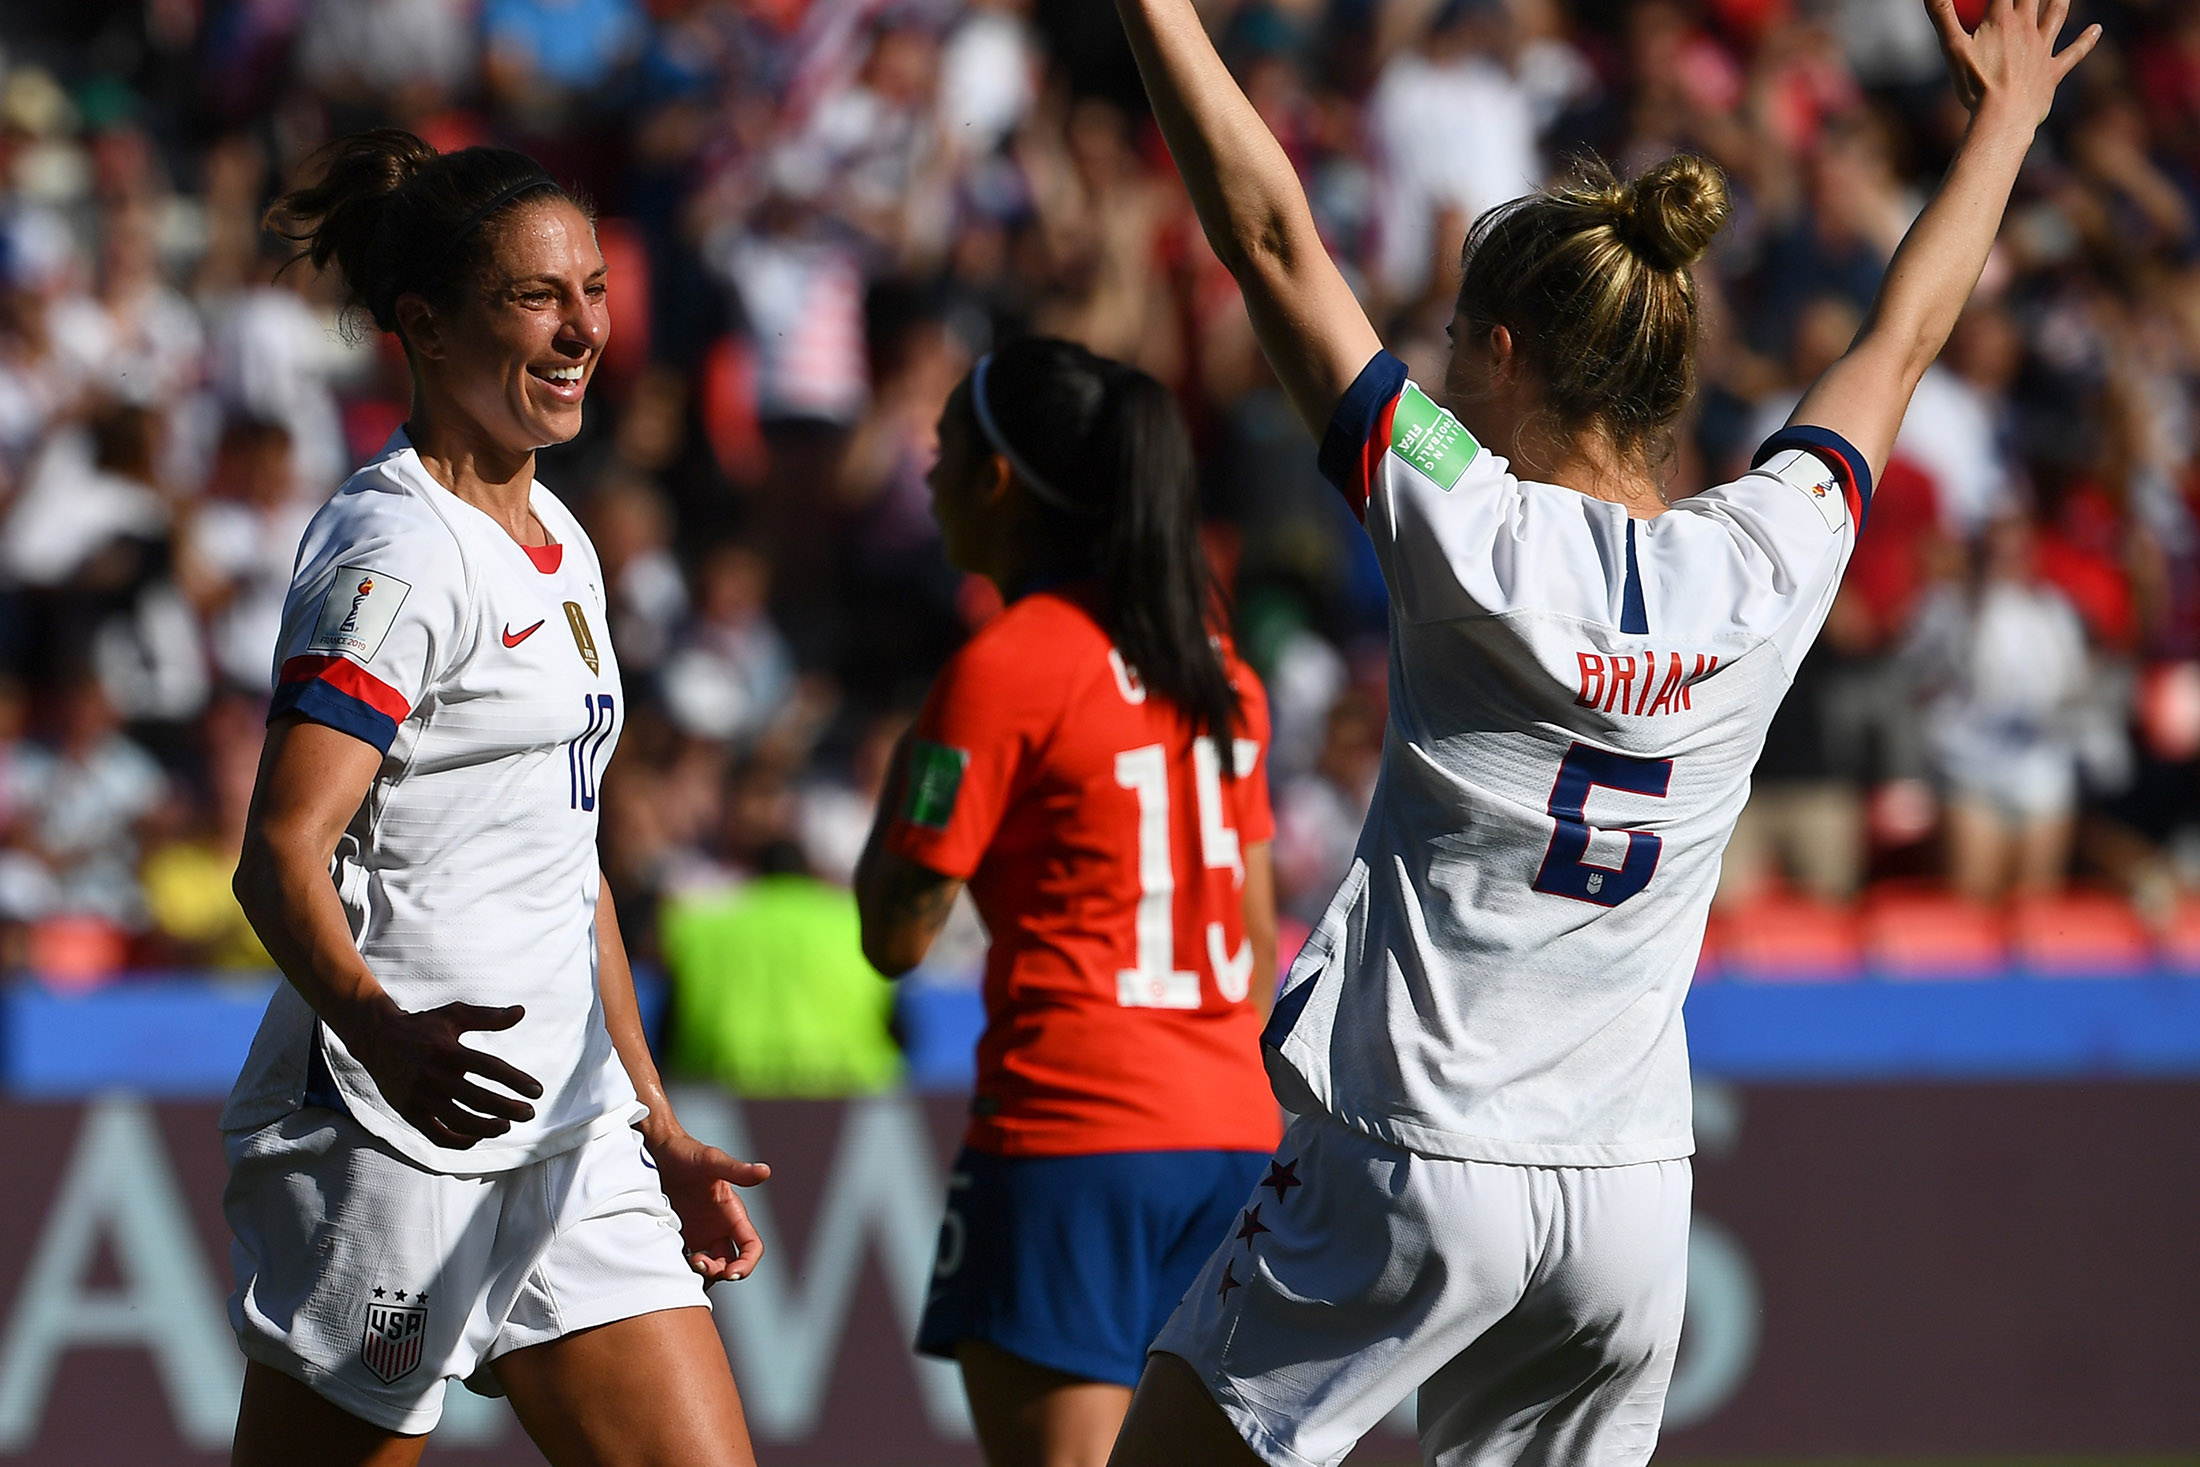 United States' forward Carli Lloyd, left,&nbsp;celebrates after scoring a goal during the France 2019 Women's World Cup match against Chile, on June 16.